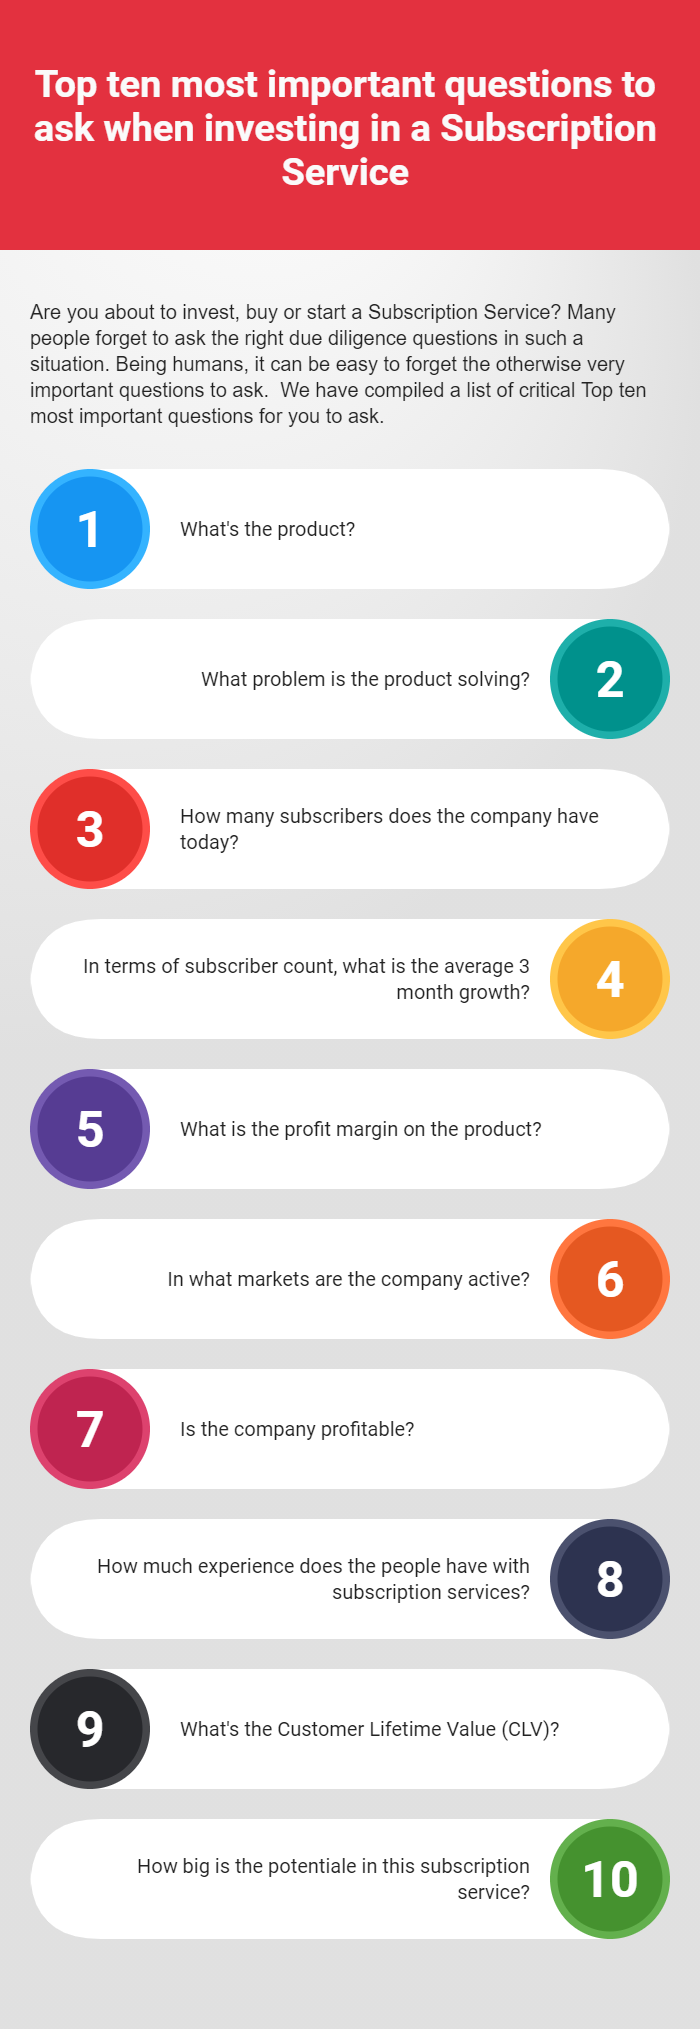 Top ten most important questions to ask when investing in a Subscription Service